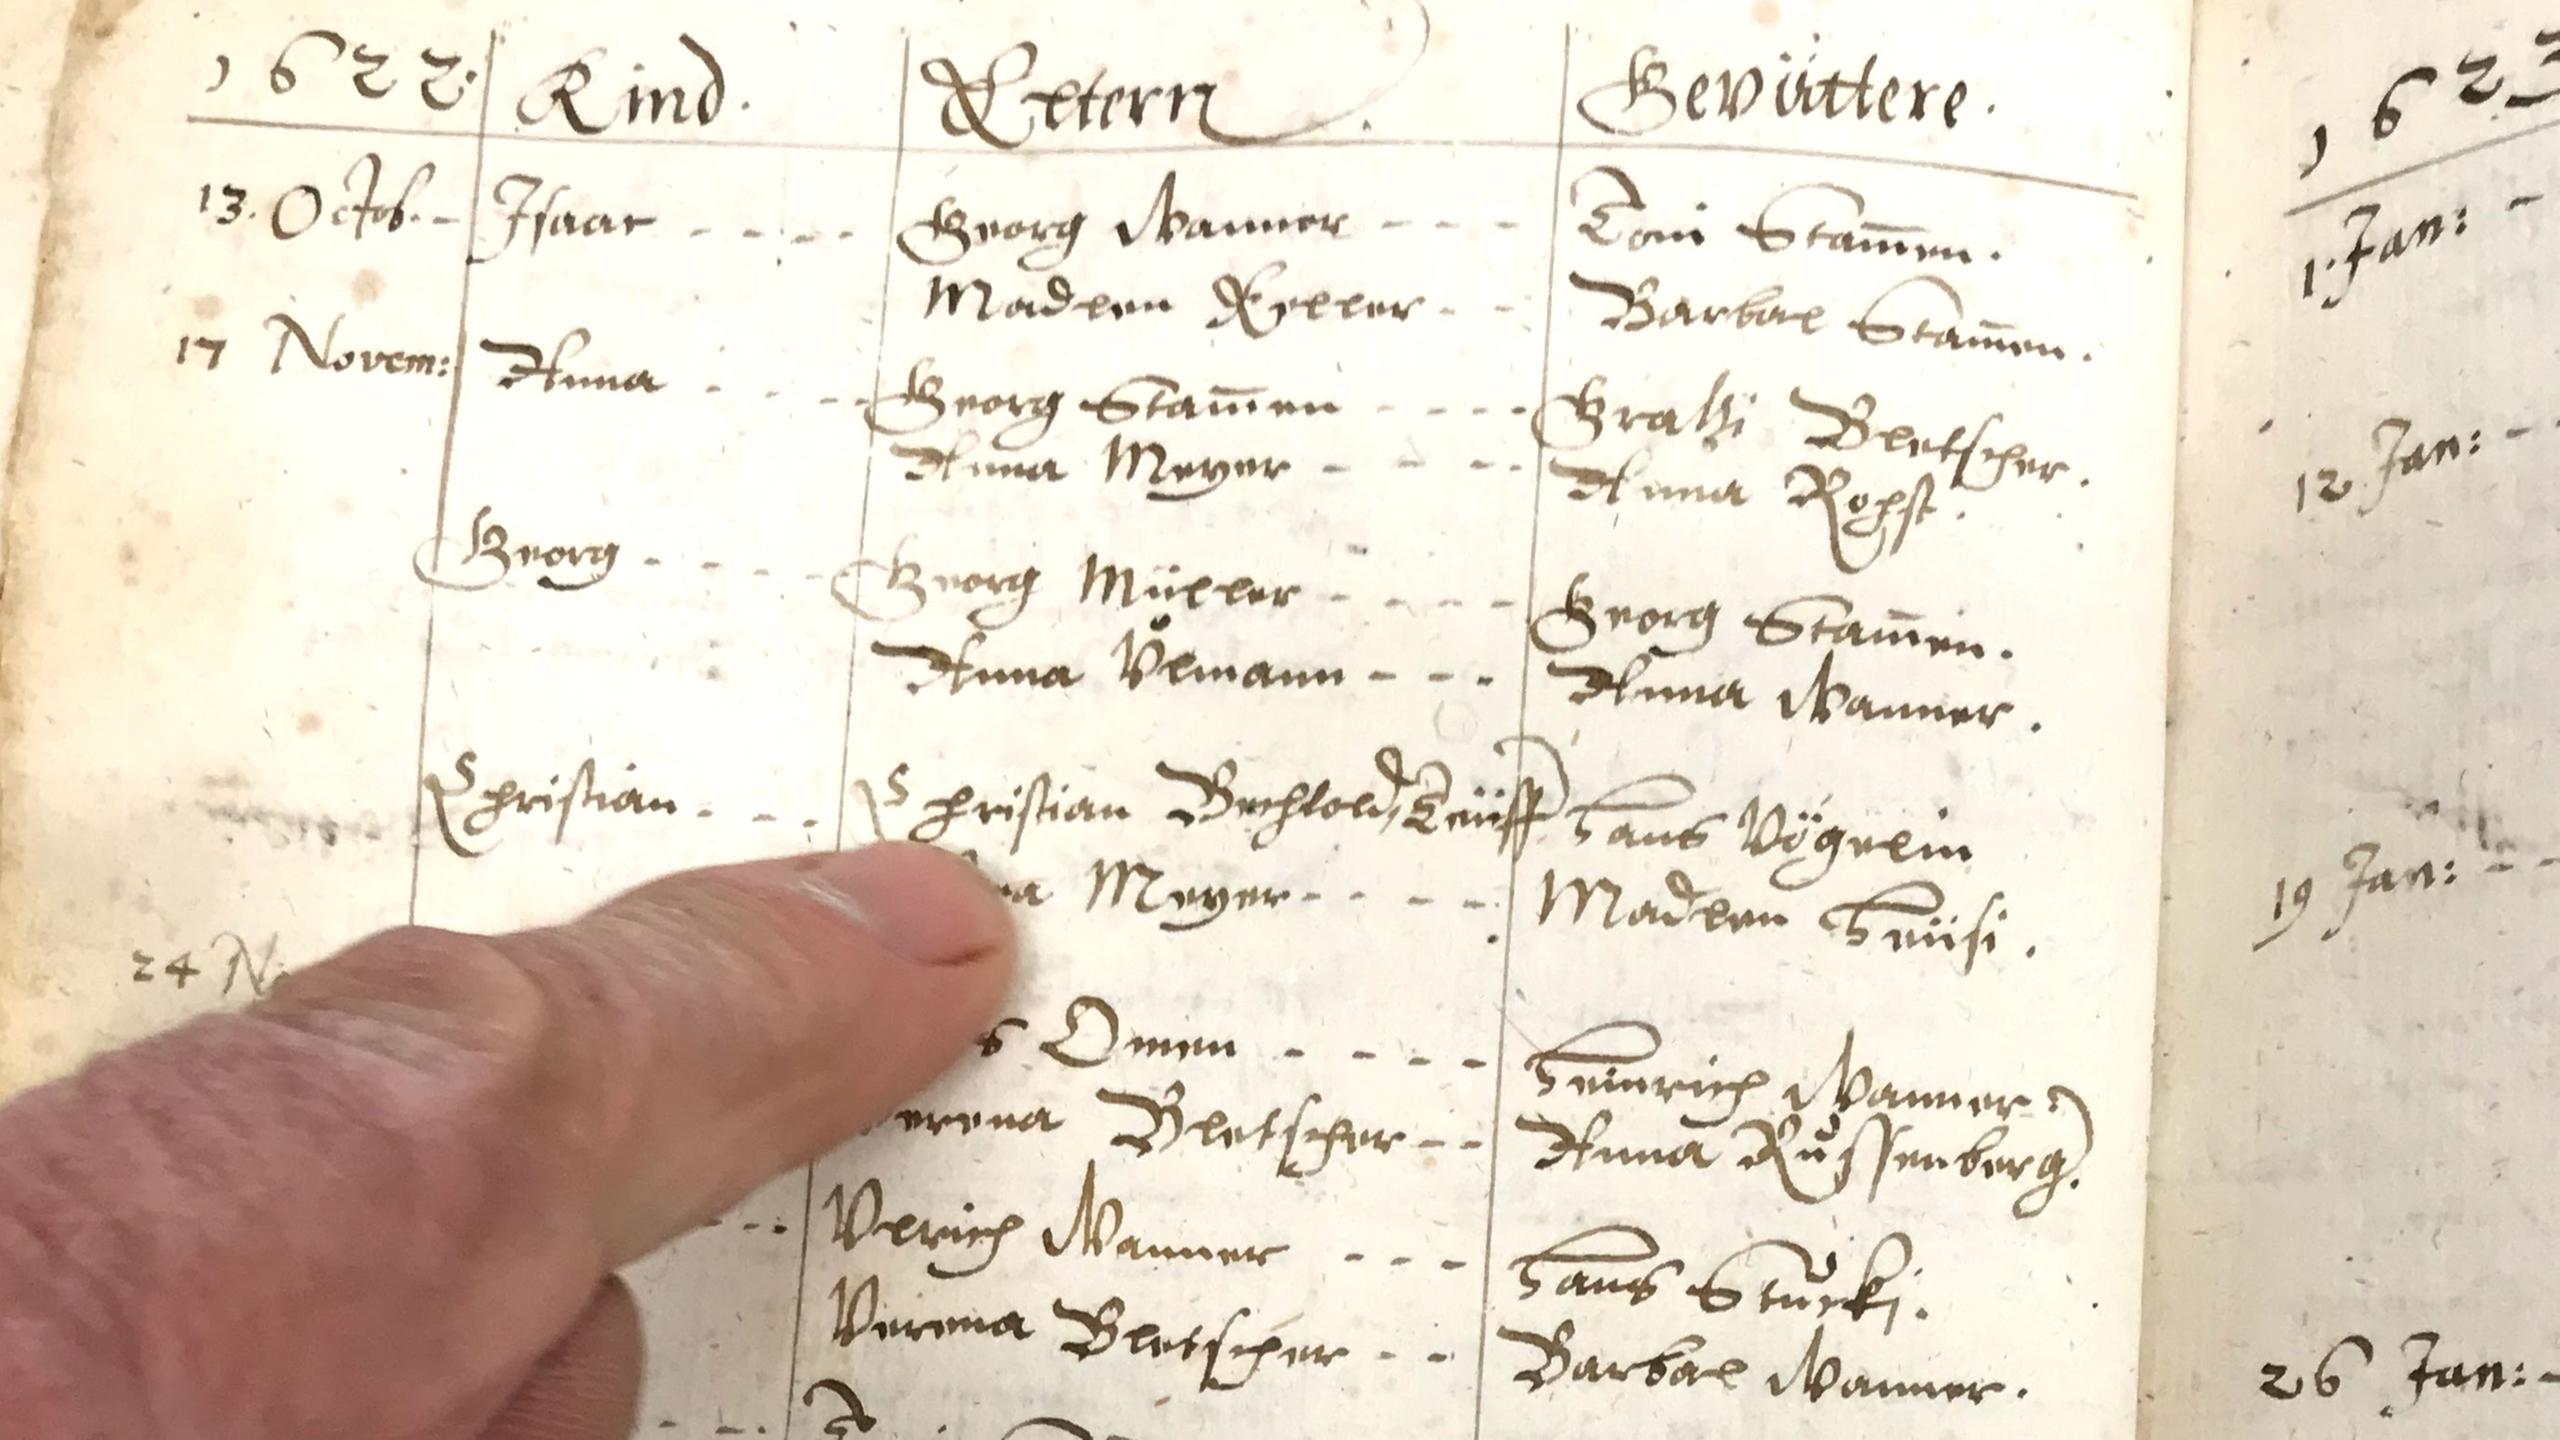 Finger points to Old German script entry in archive record